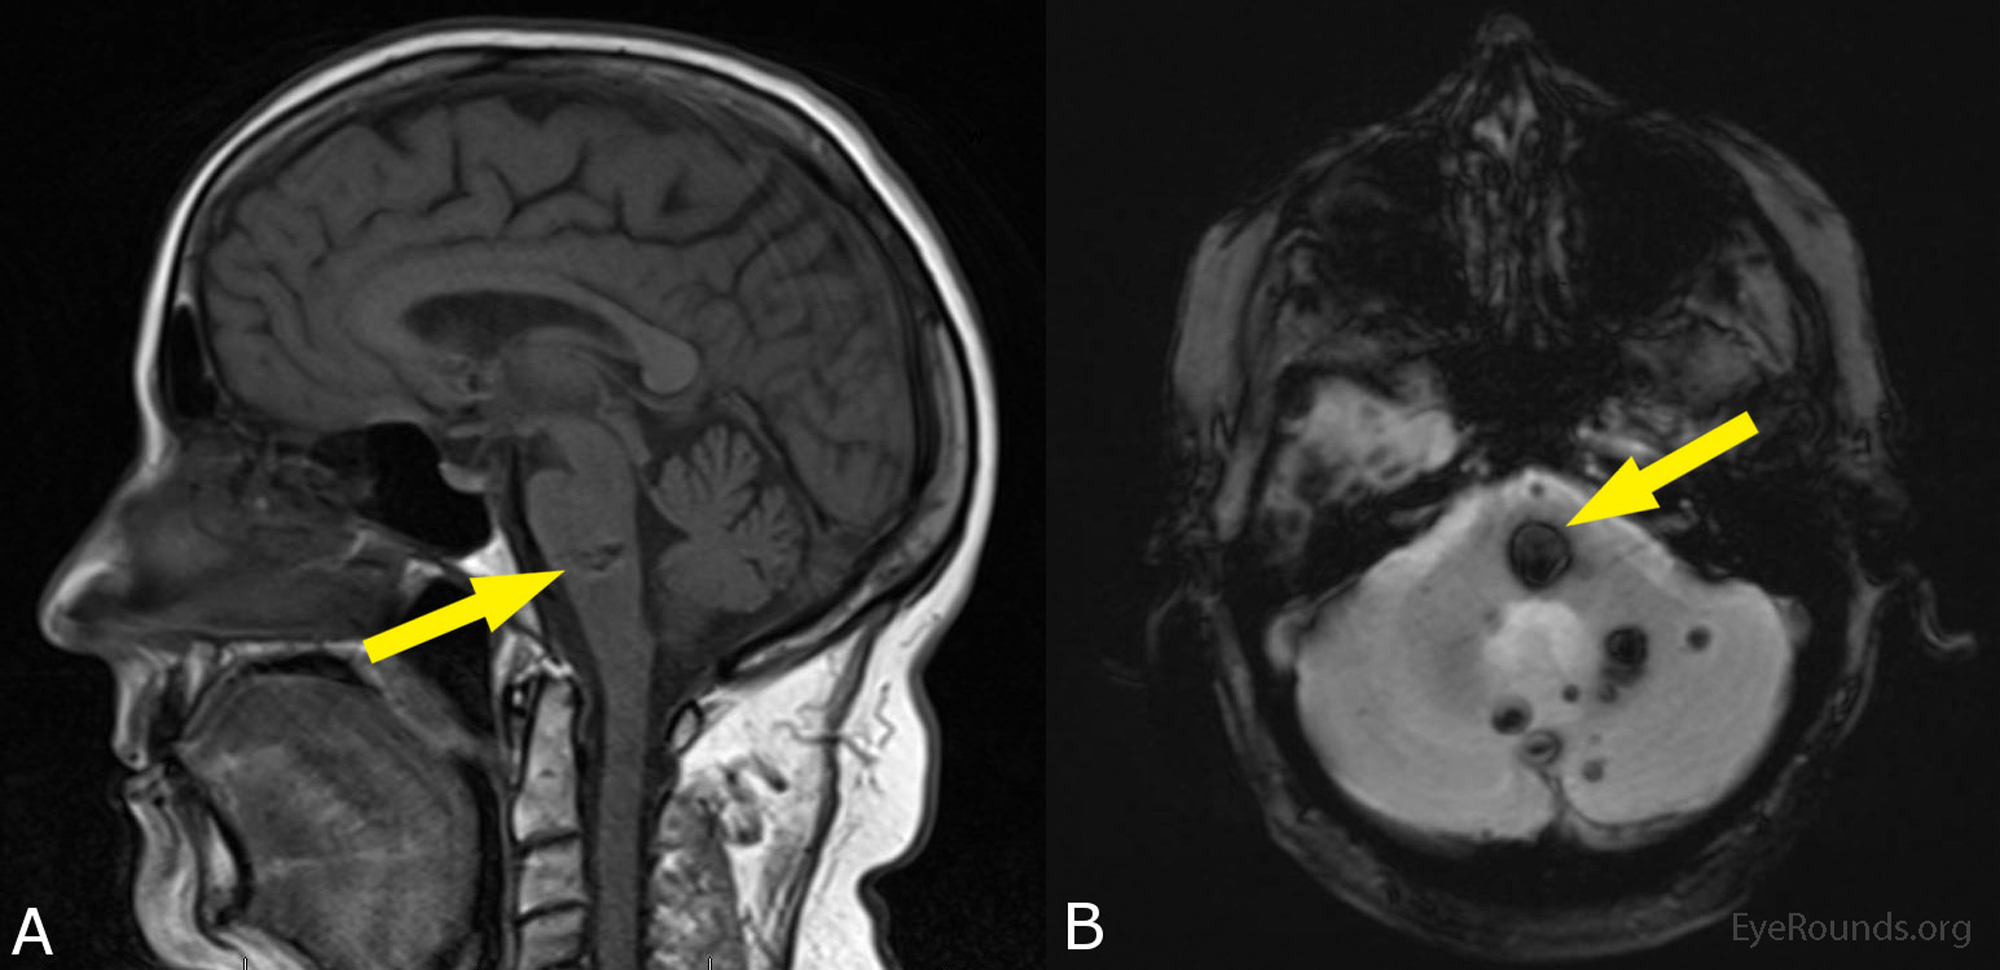 mri cerebral brain cavernoma brainstem syndrome lesions lesion multiple t1 imaging magnetic resonance cause showing half cases axial ophth uiowa